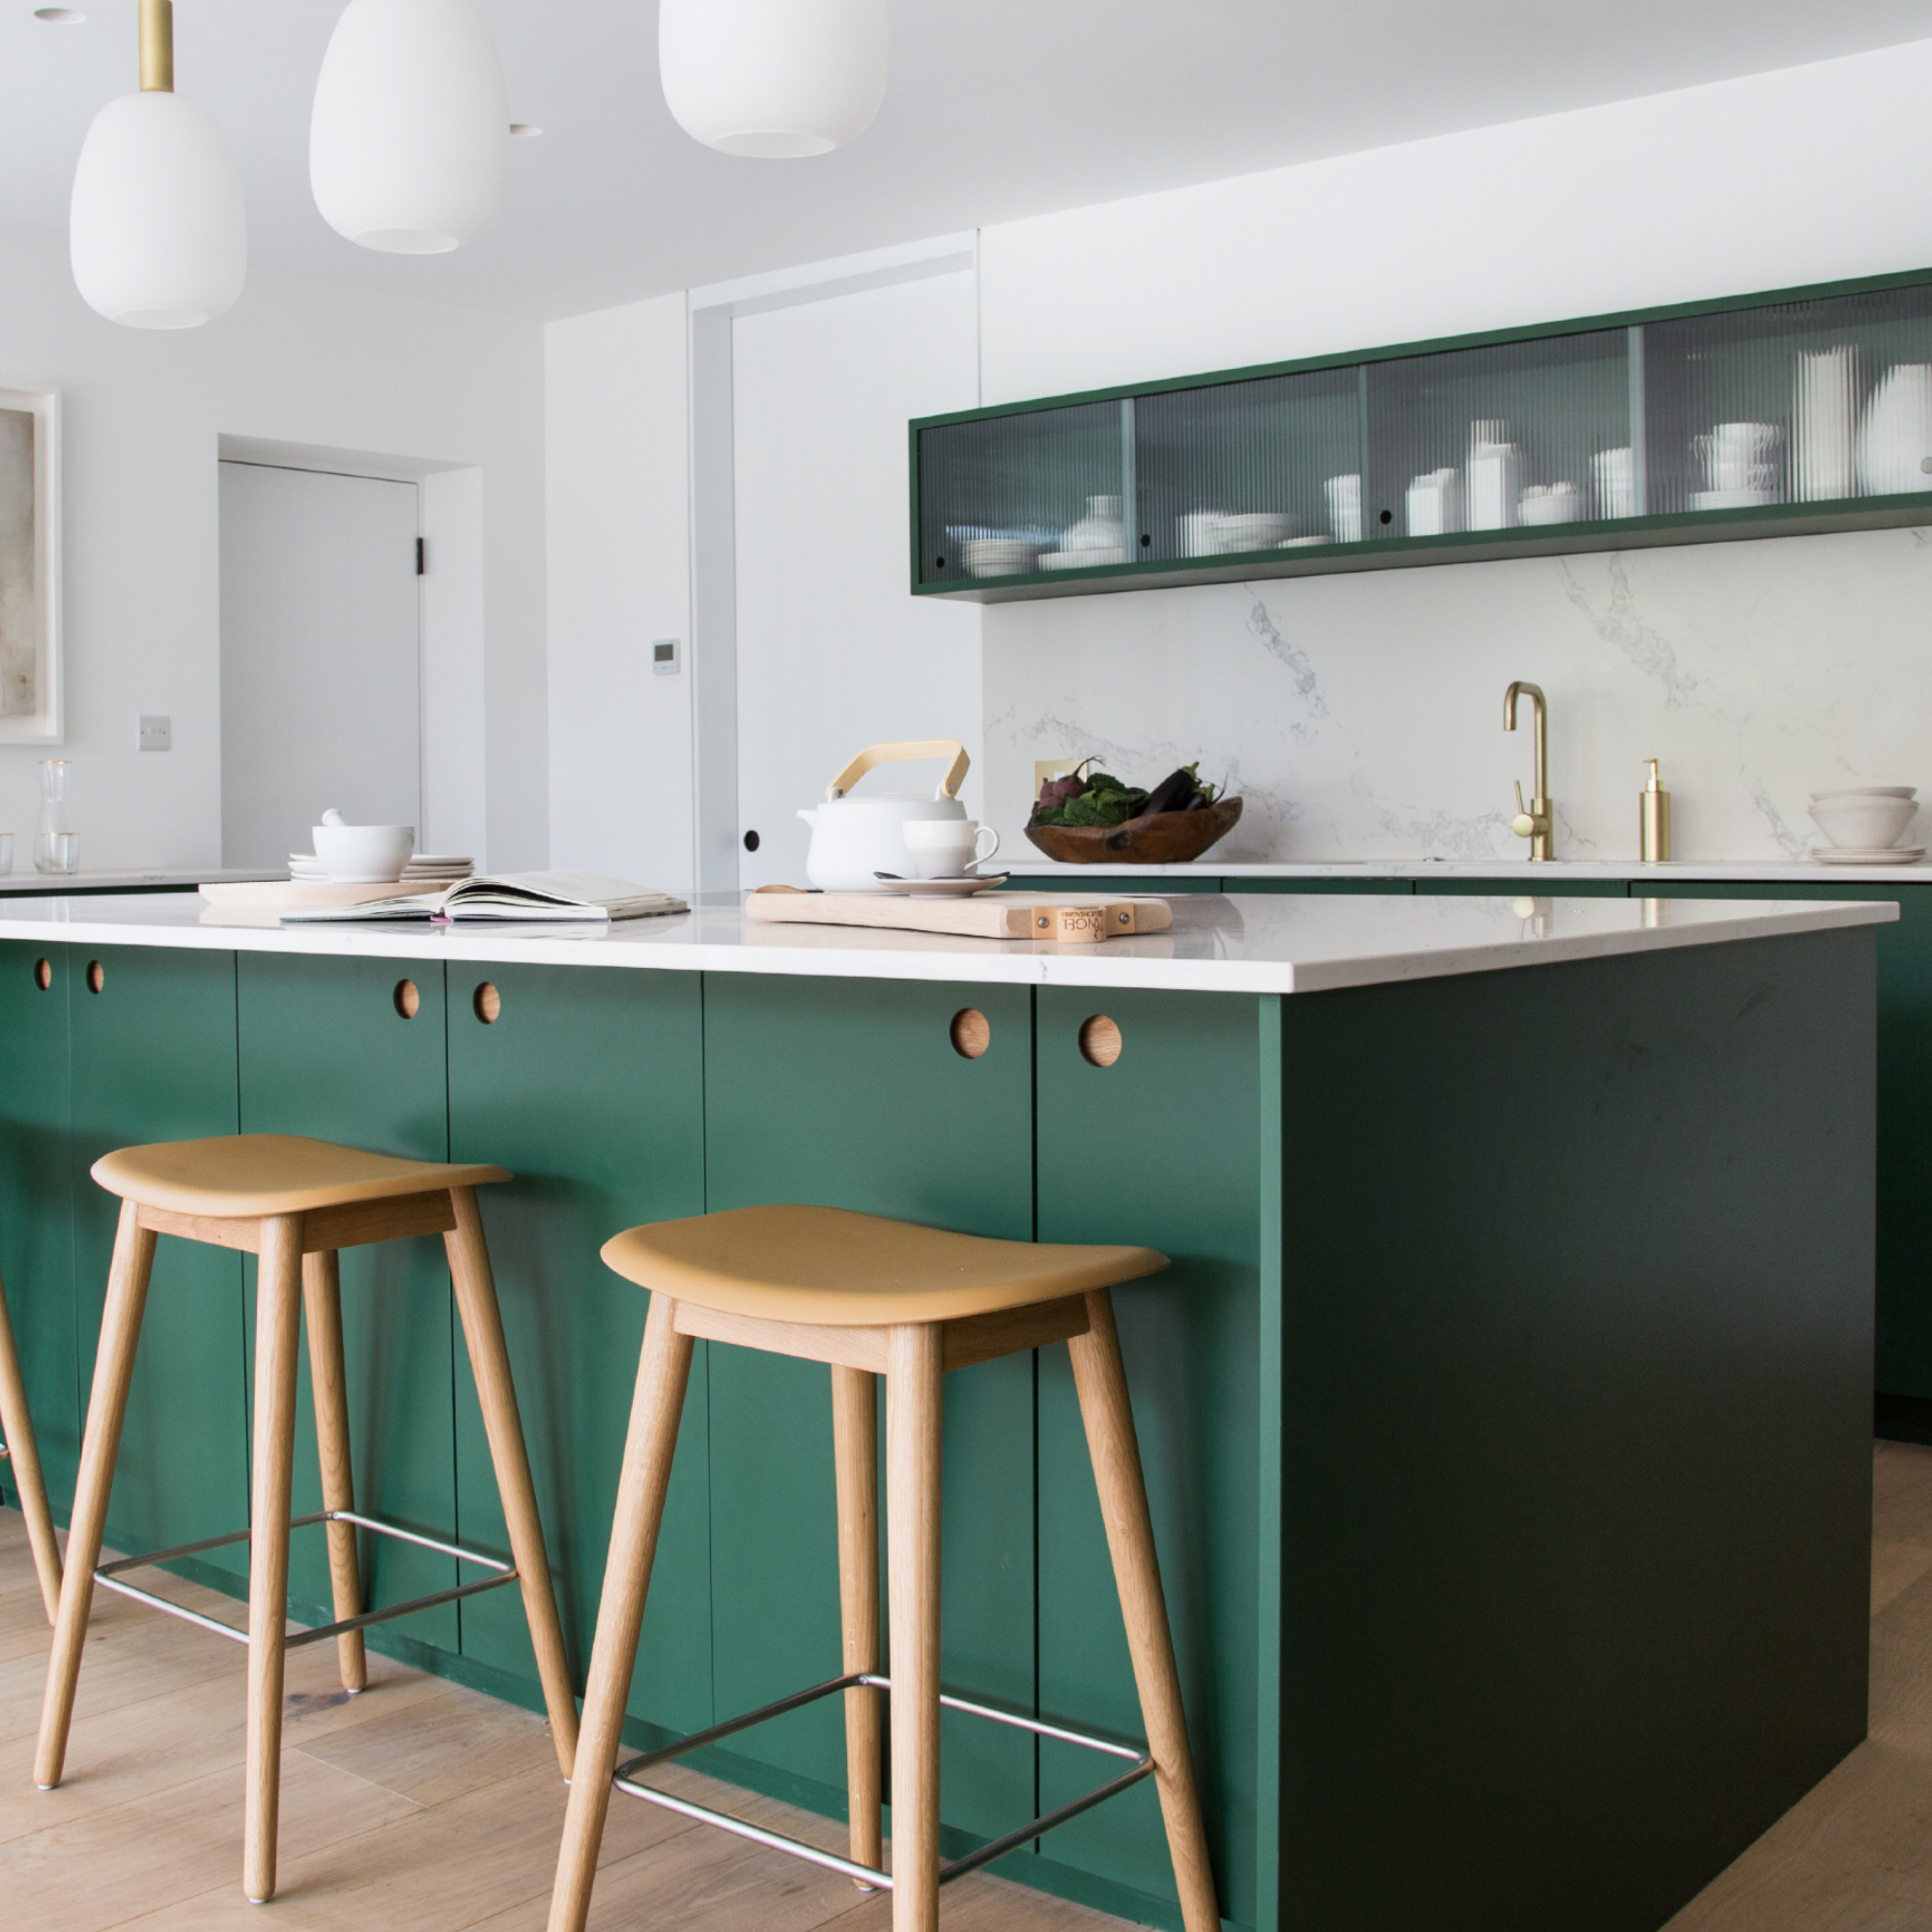 The Complete Guide to Stylishly Decorating Your Kitchen Island